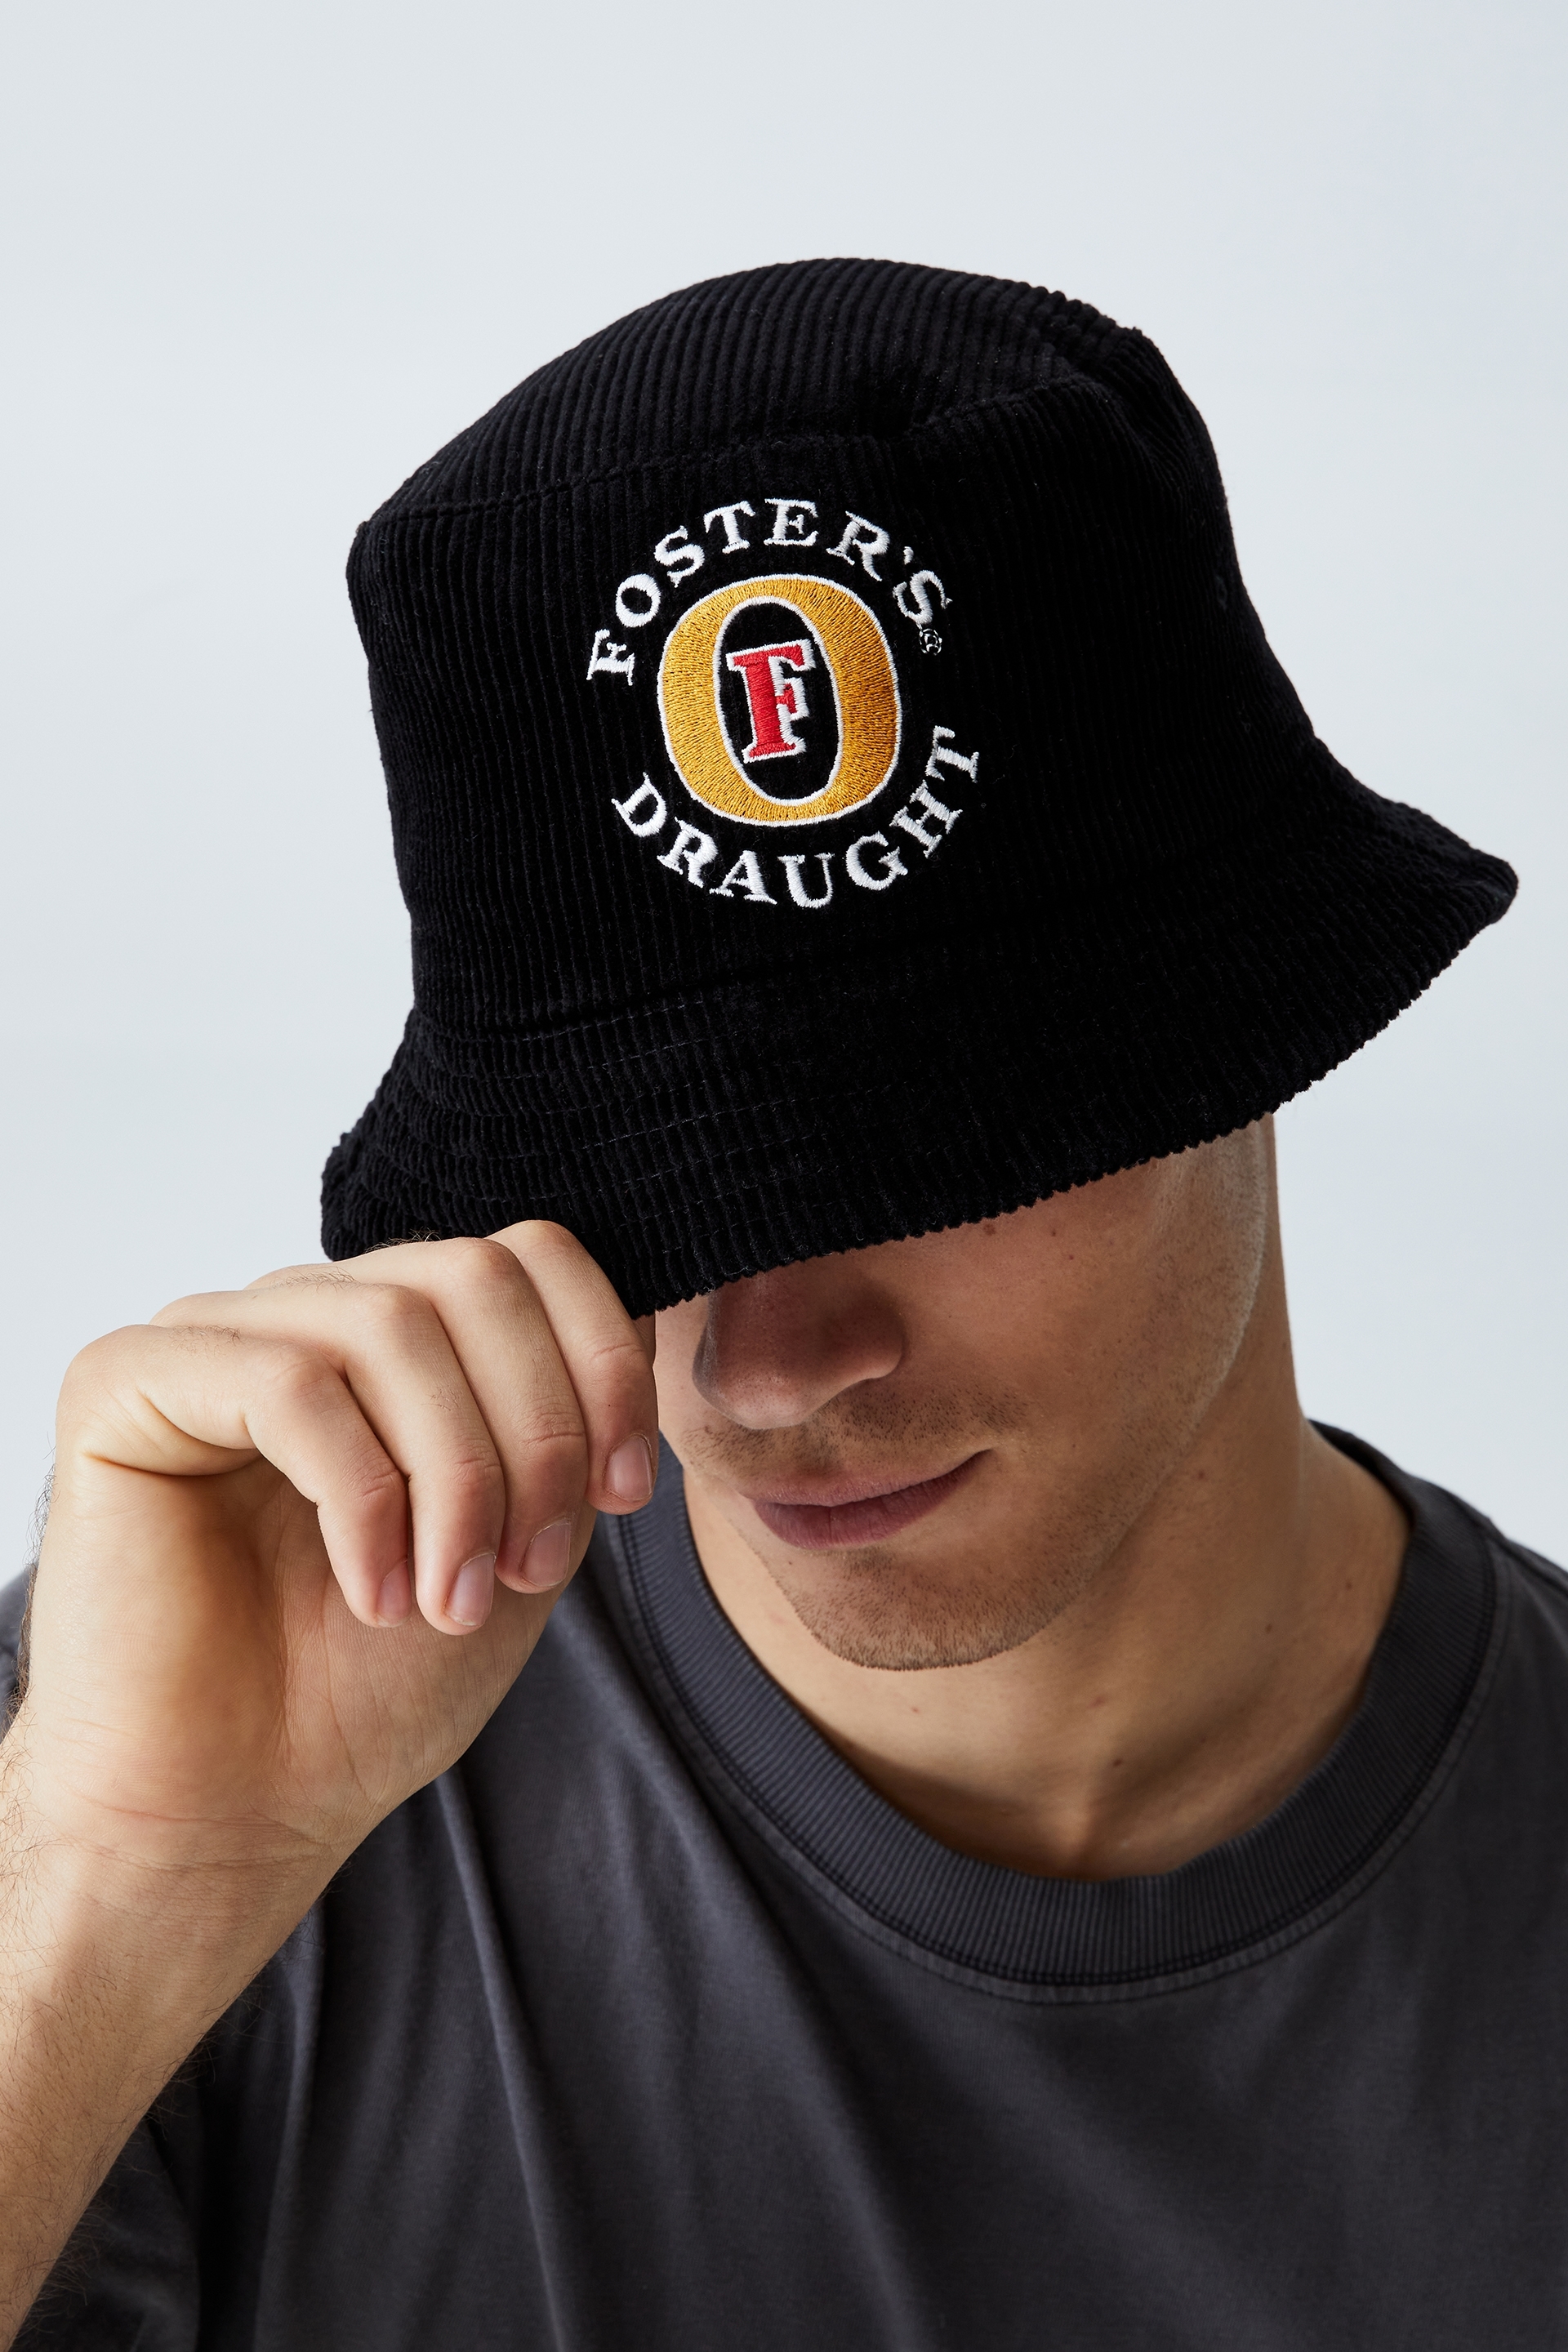 Cotton On Men - Fosters Bucket Hat Personalised - Lcn fos washed black/fosters logo